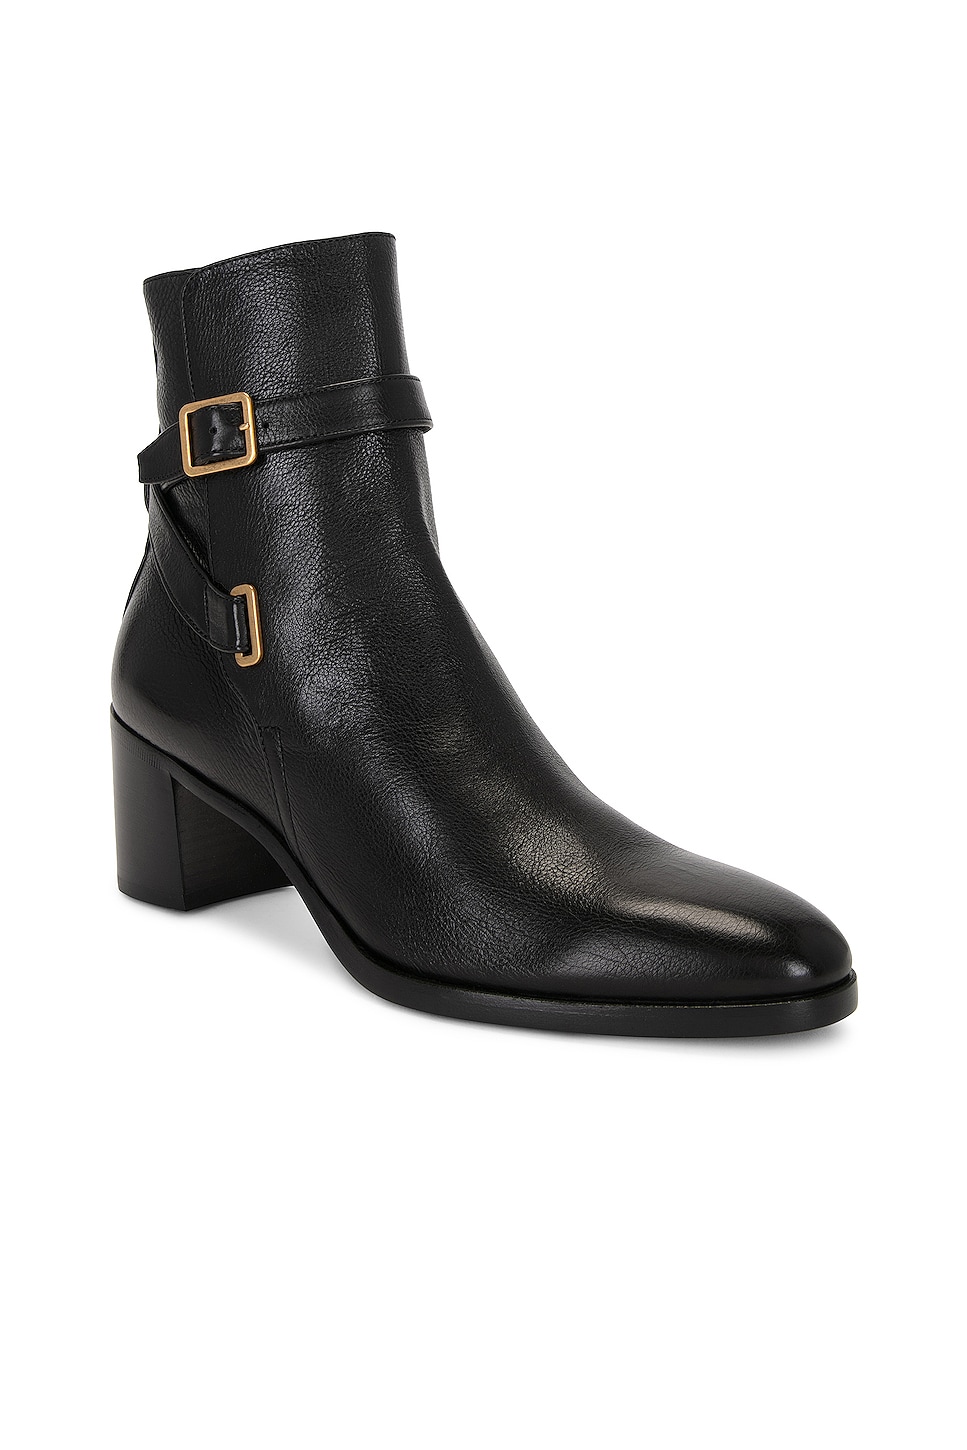 Ankle Booties For Women | Women's Designer Ankle Booties